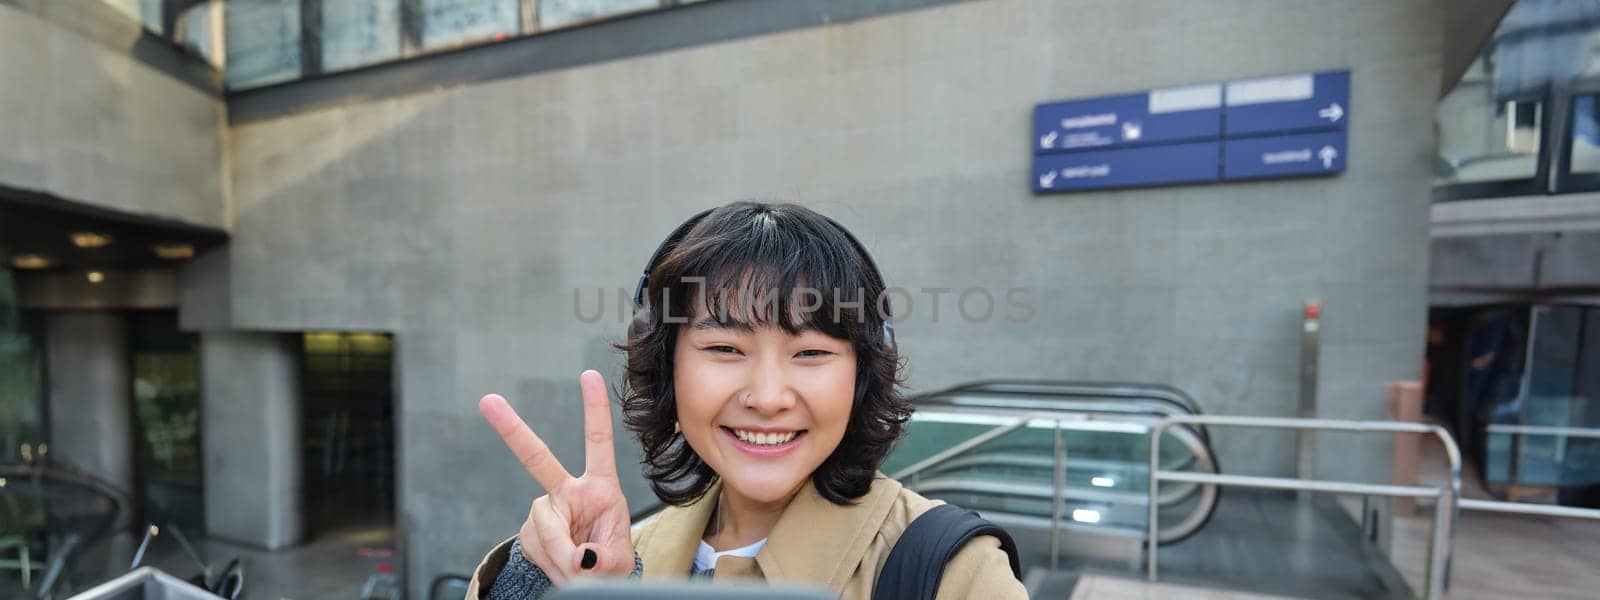 Cute and stylish Korean girl, wears headphones, takes selfie on smartphone, tourist records video or makes a photo, stands on street.